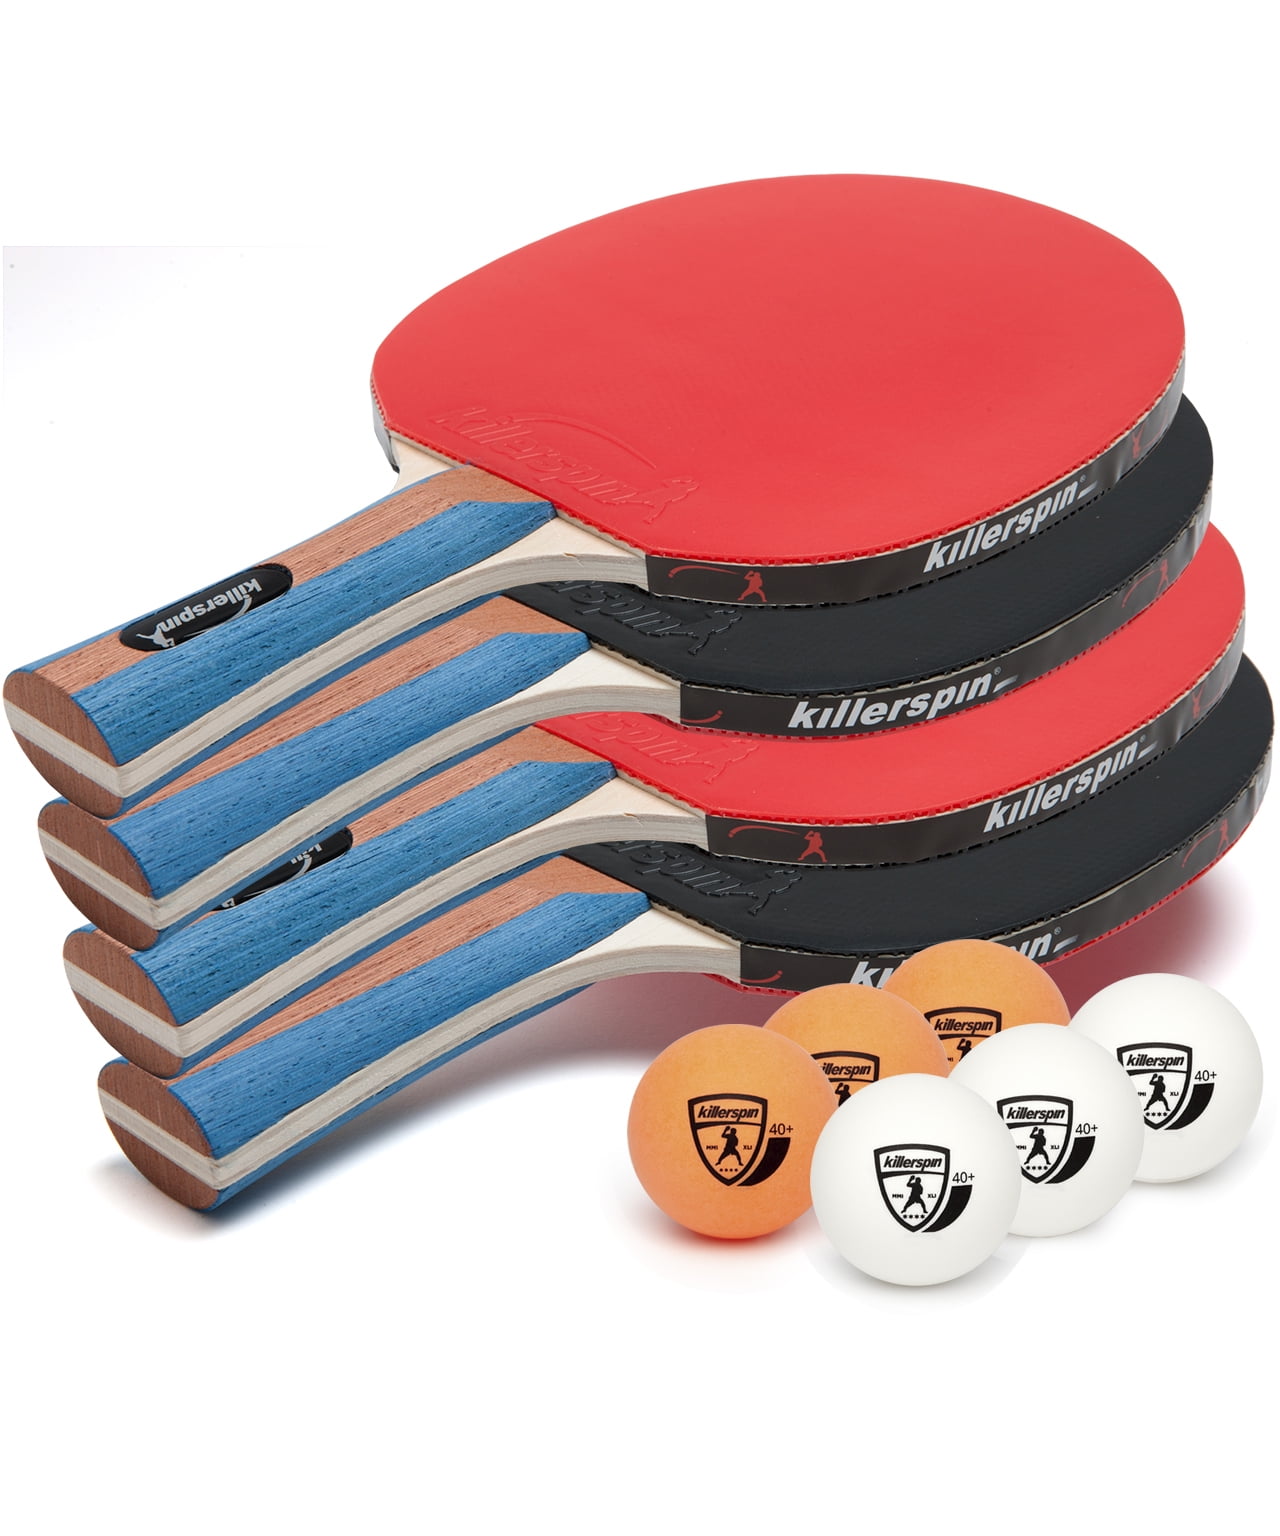 Table Tennis Set of 4 Ping Pong Racket Set with 4 Bats/Paddle and 8 Balls, 